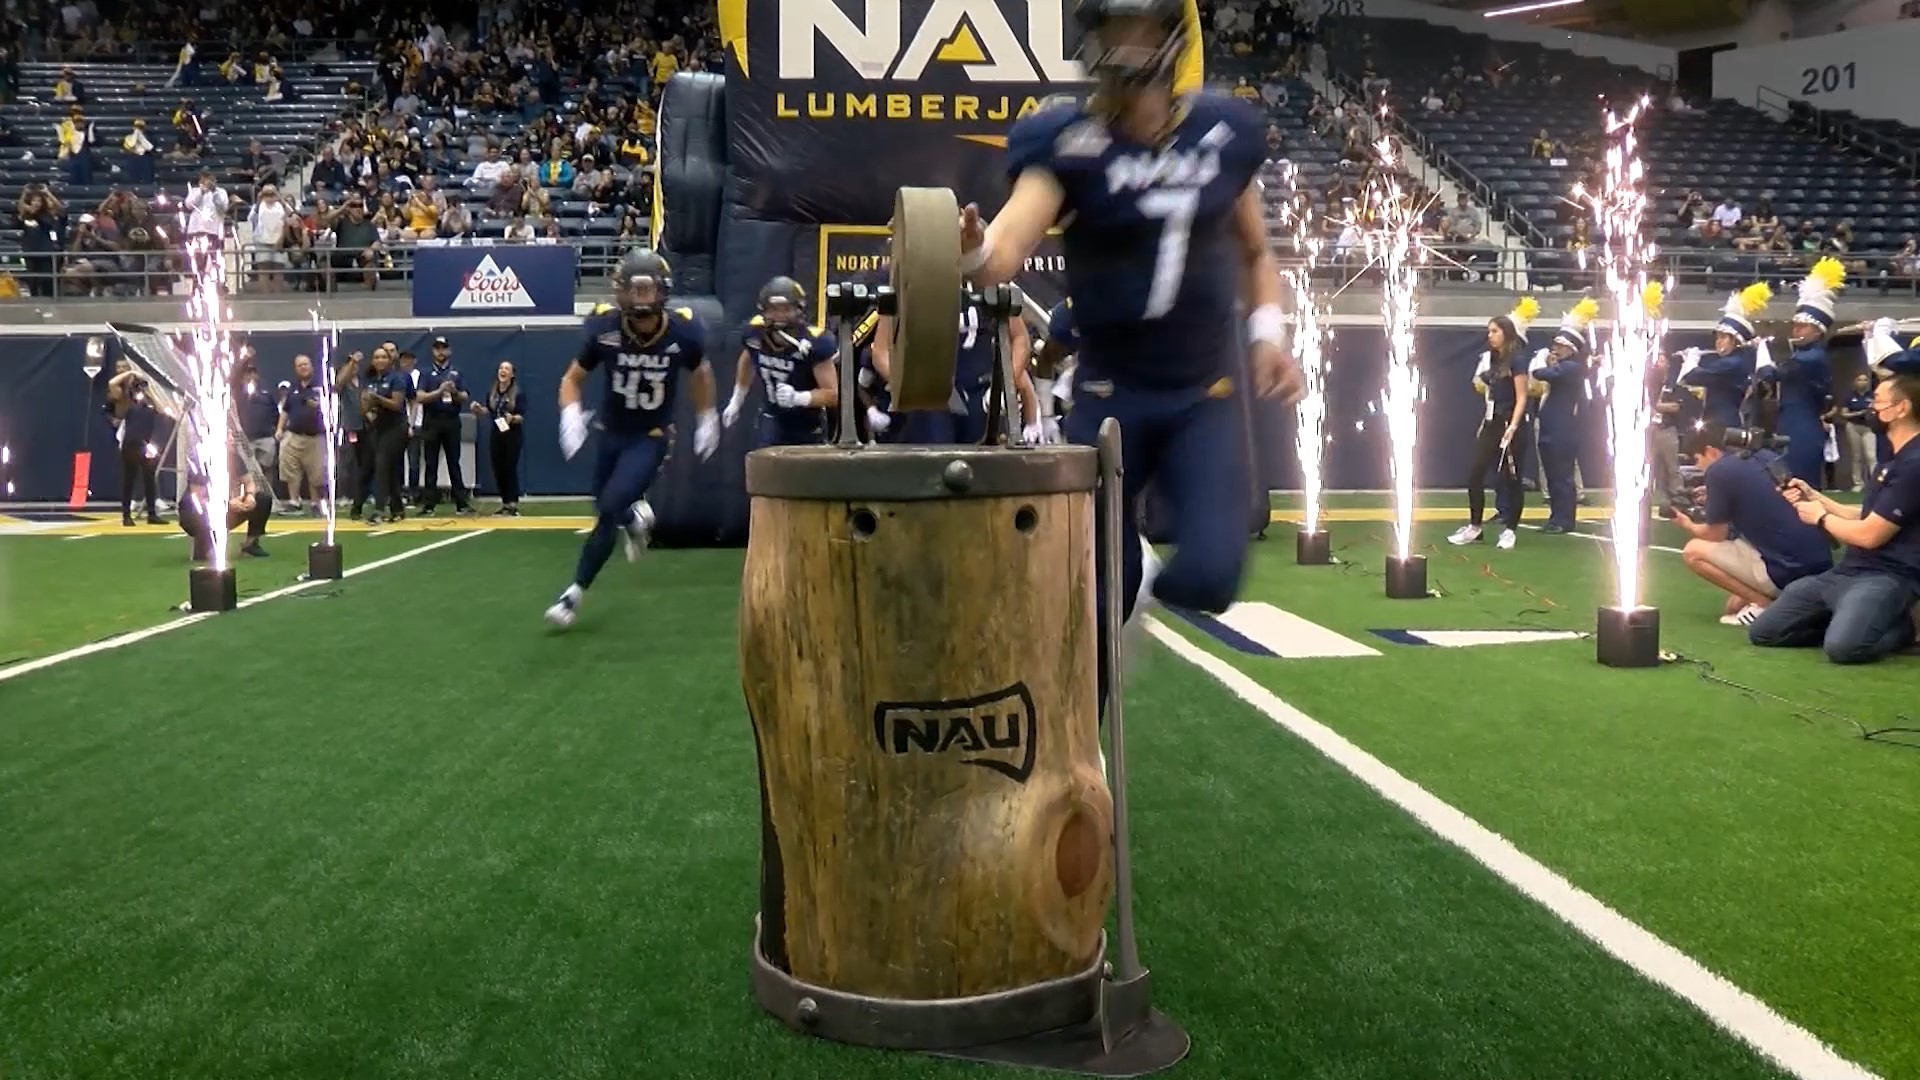 Northern Arizona University football team running out onto the field touching the iconic honing stone.